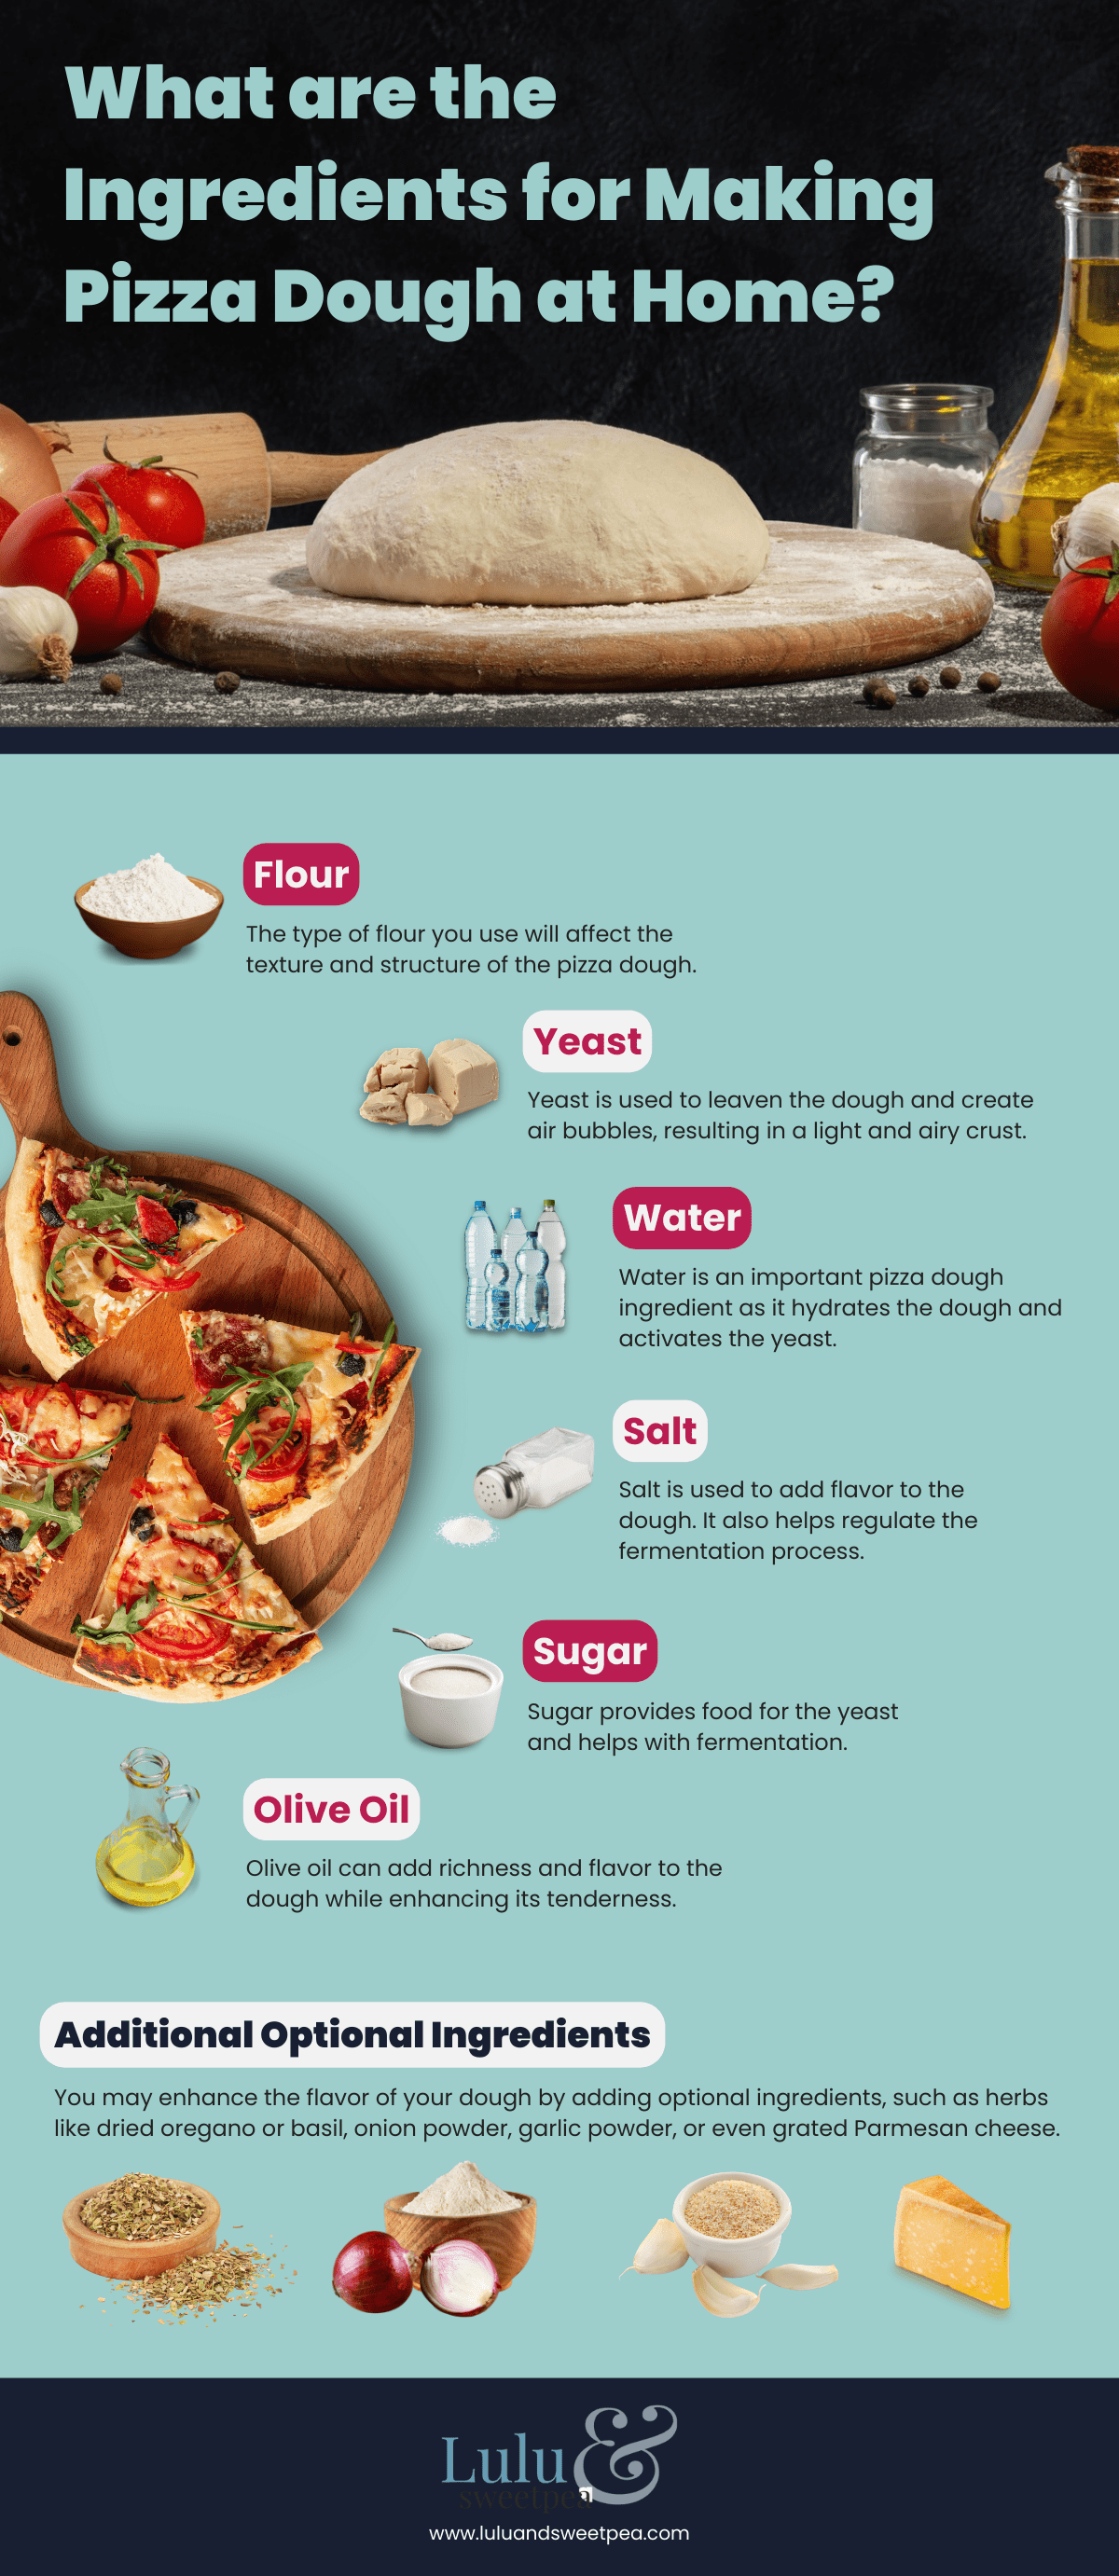 What are the Ingredients for Making Pizza Dough at Home